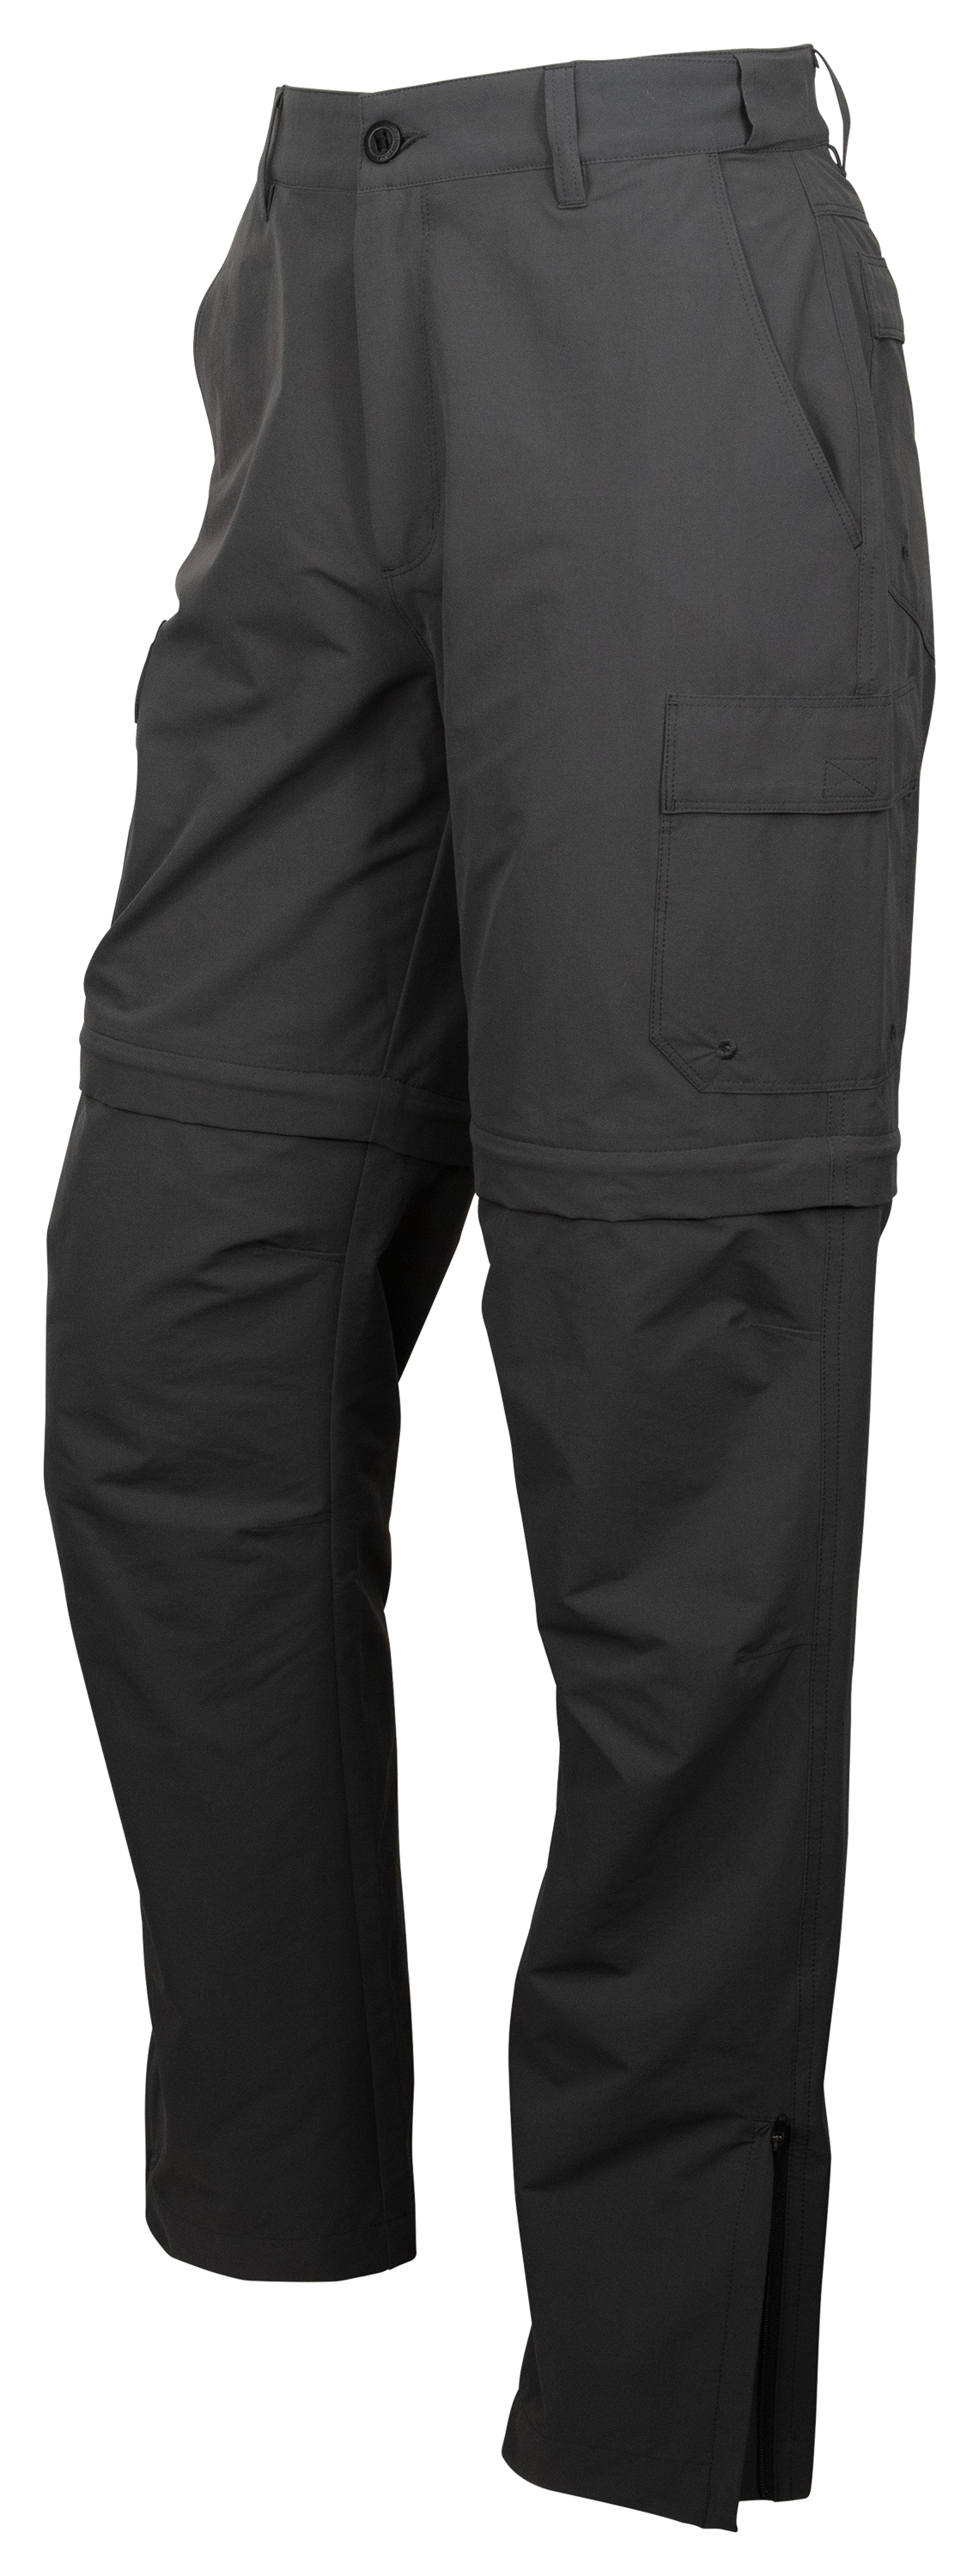 World Wide Sportsman Ultimate Angler Convertible Pants for Ladies